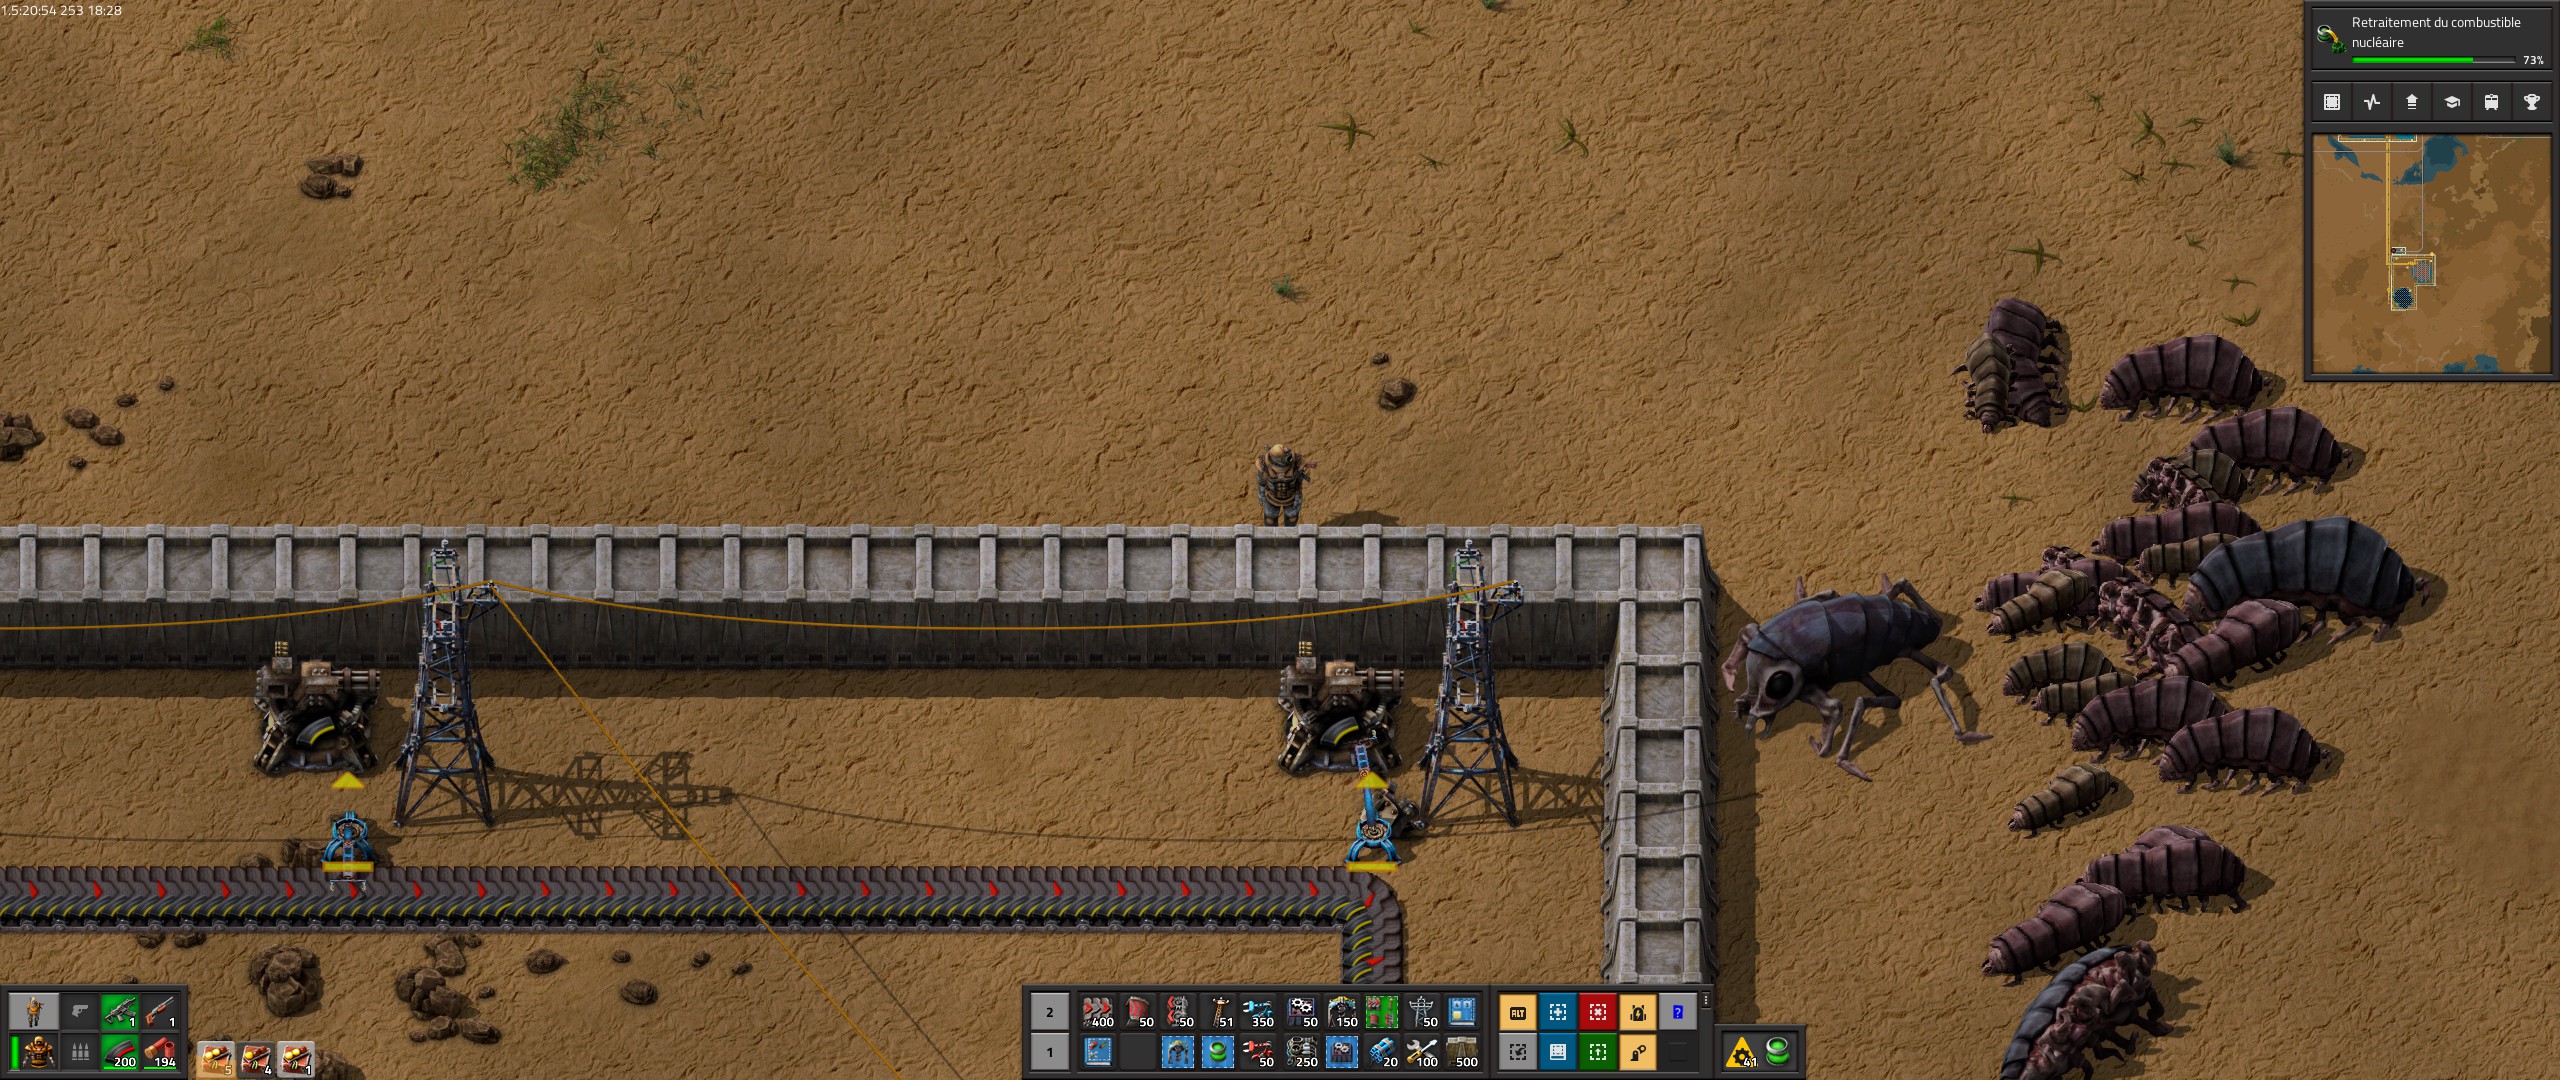 Screenshot showing the problematic inserter